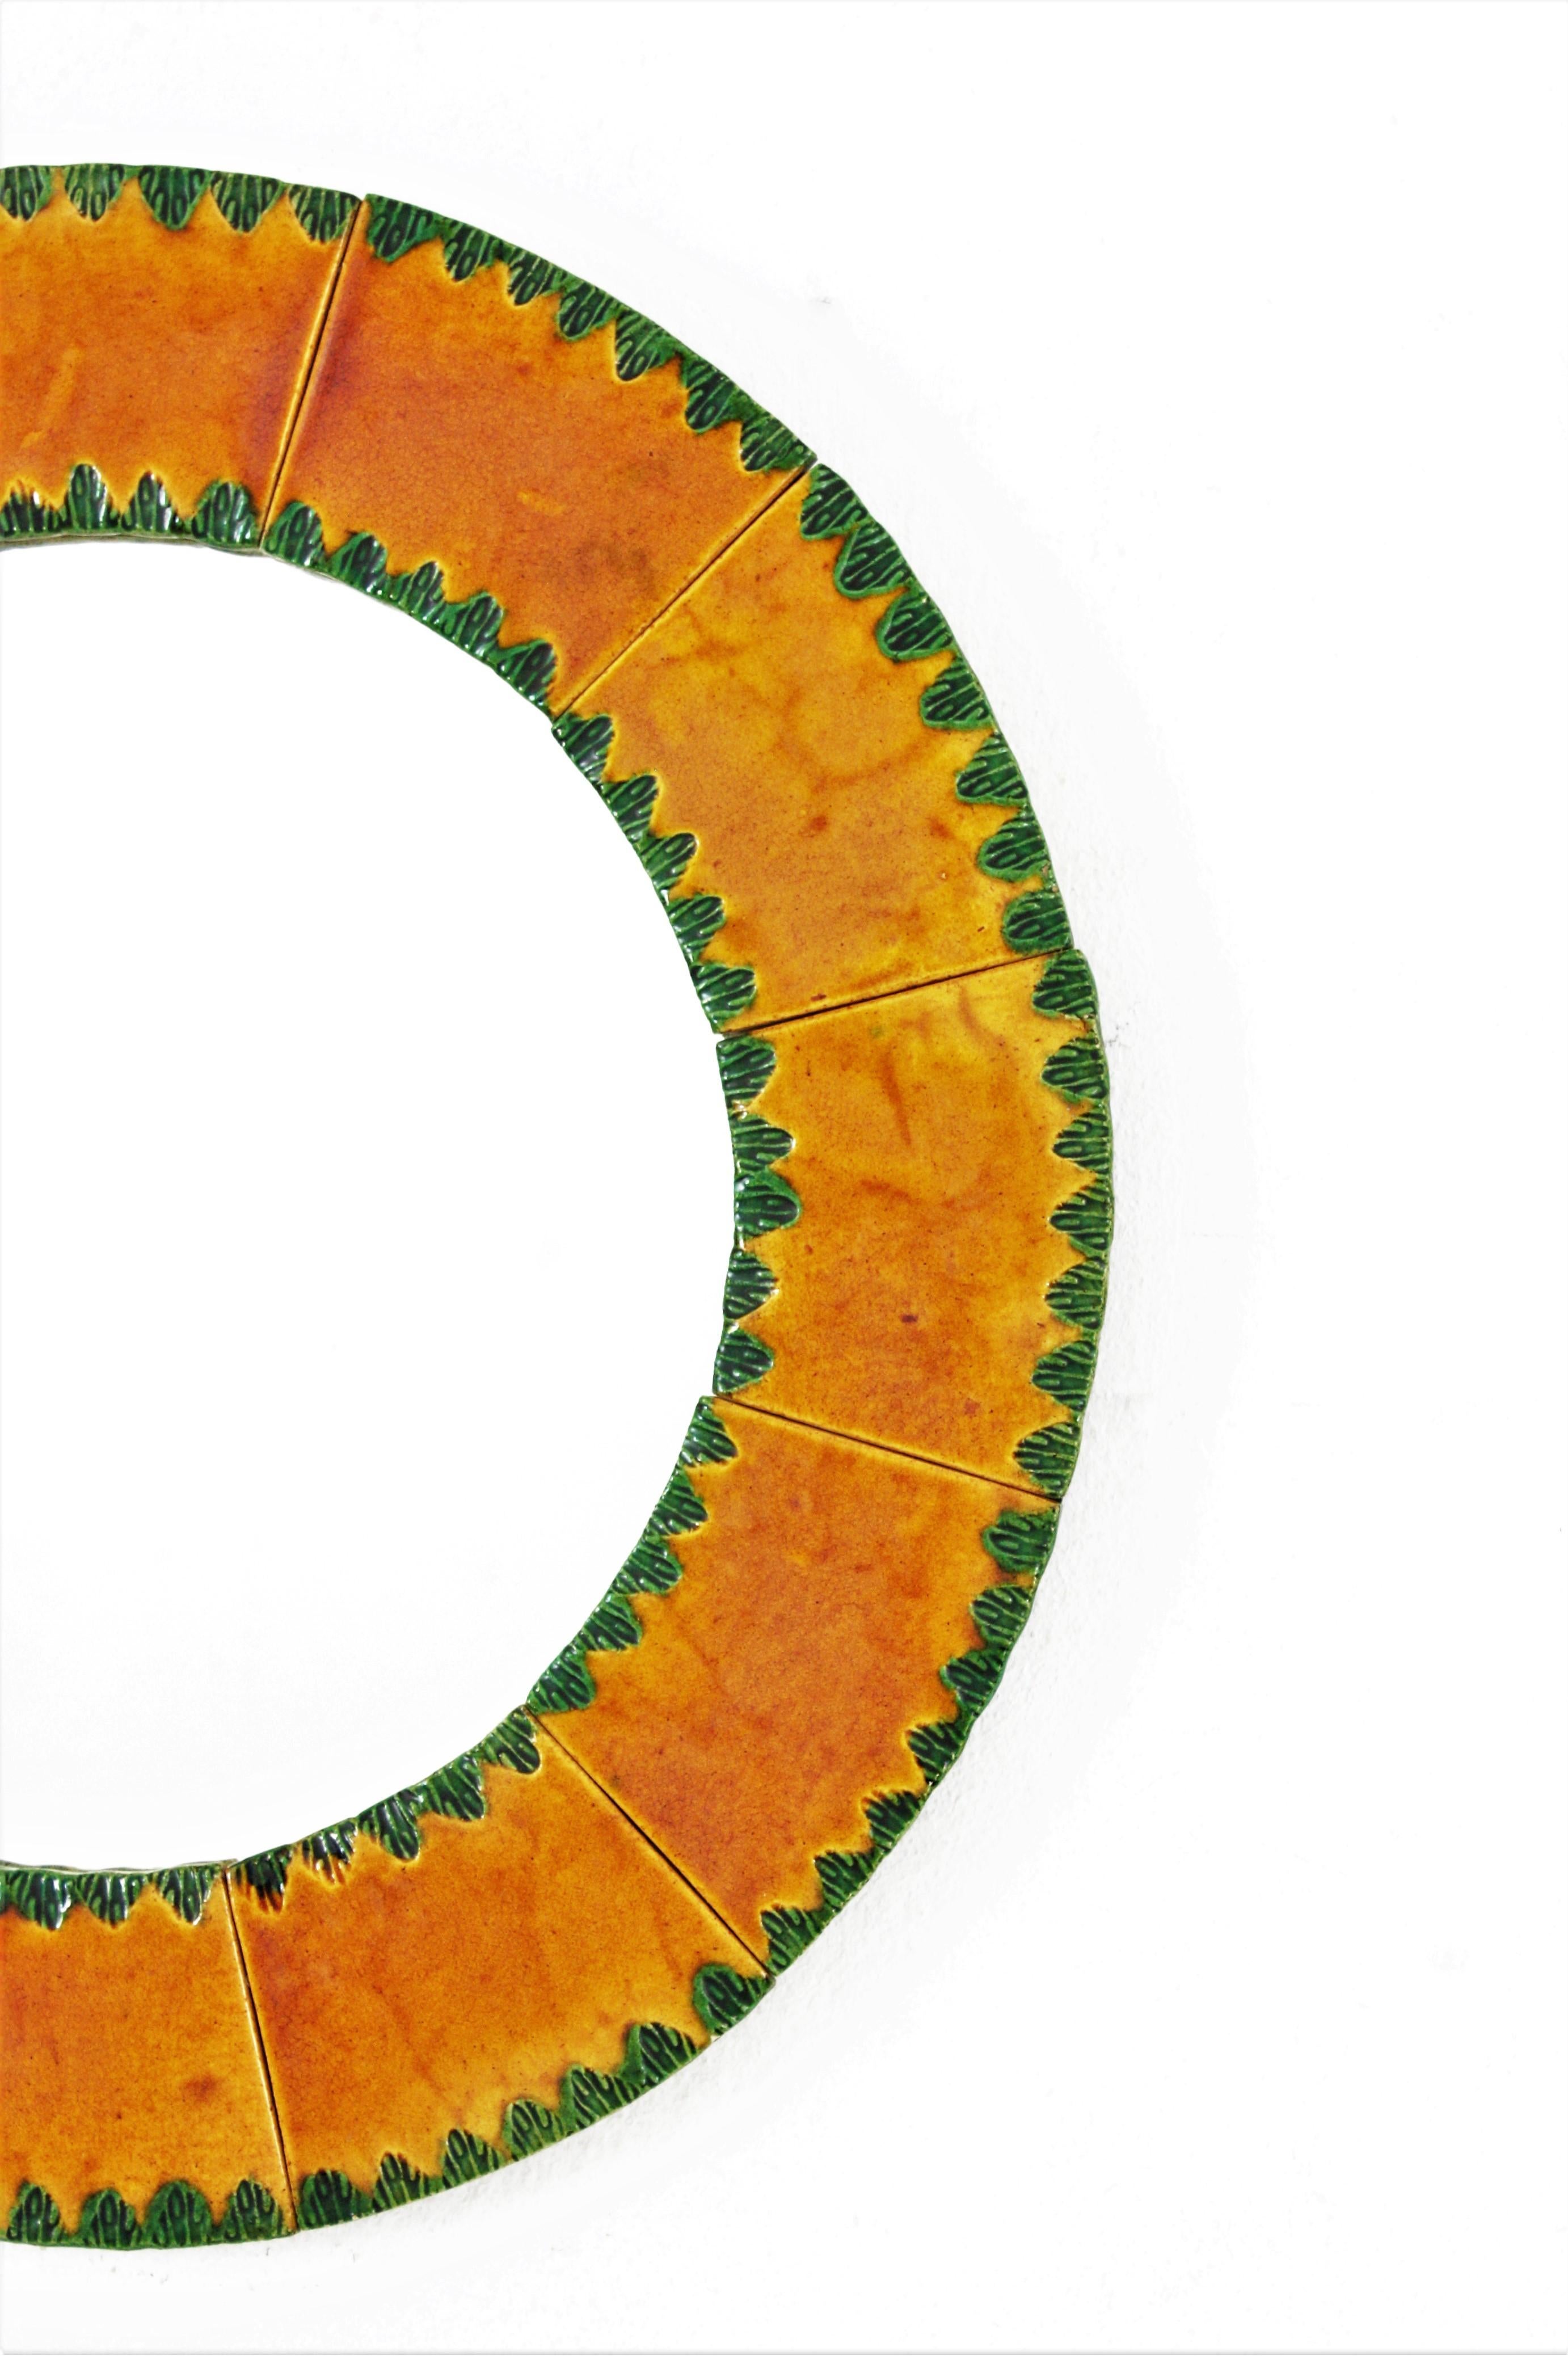 Hand-Crafted Vallauris François Lembo Style Ceramic Round Mirror in Orange and Green